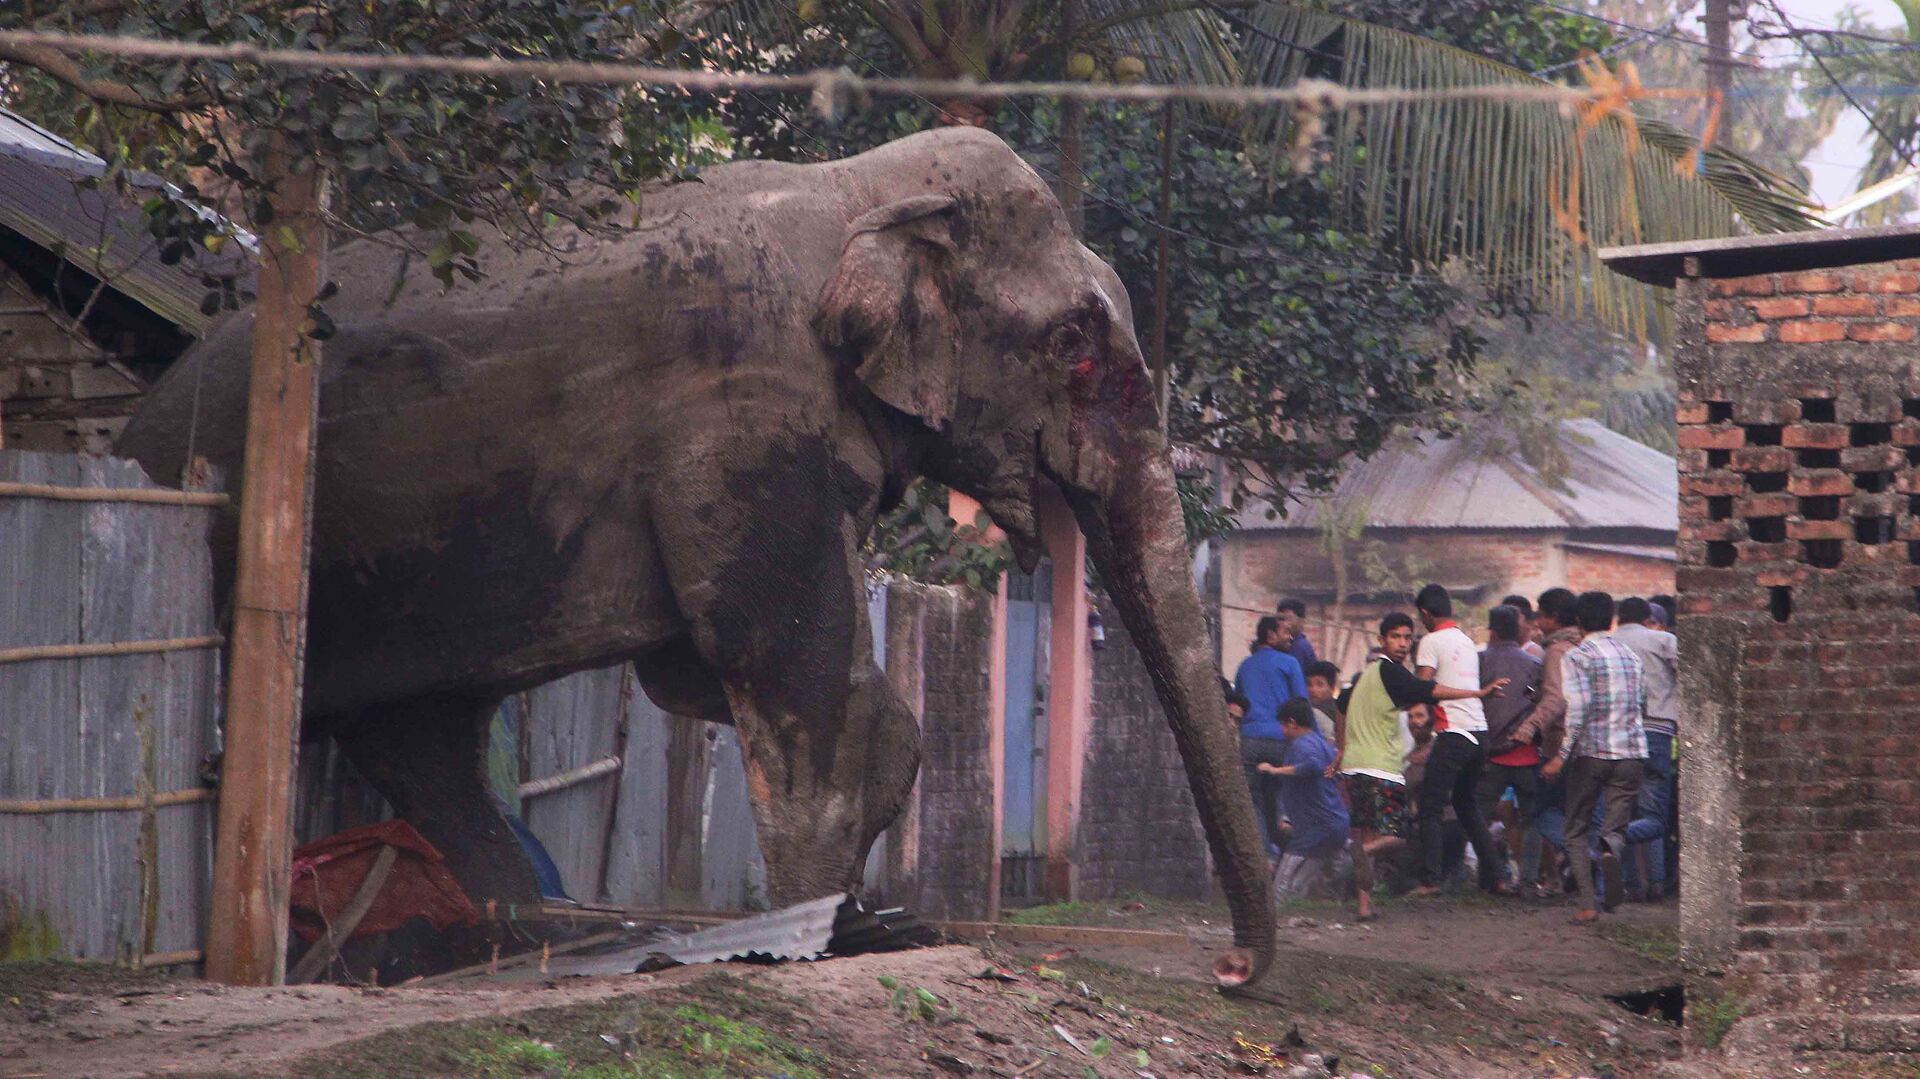 People run as they follow a wild elephant that strayed into the town of Siliguri in West Bengal state, India, Wednesday, Feb. 10, 2016. The elephant had wandered from the Baikunthapur forest on Wednesday, crossing roads and a small river before entering the town. The panicked elephant ran amok, trampling parked cars and motorbikes before it was tranquilized. - Sputnik India, 1920, 10.03.2023